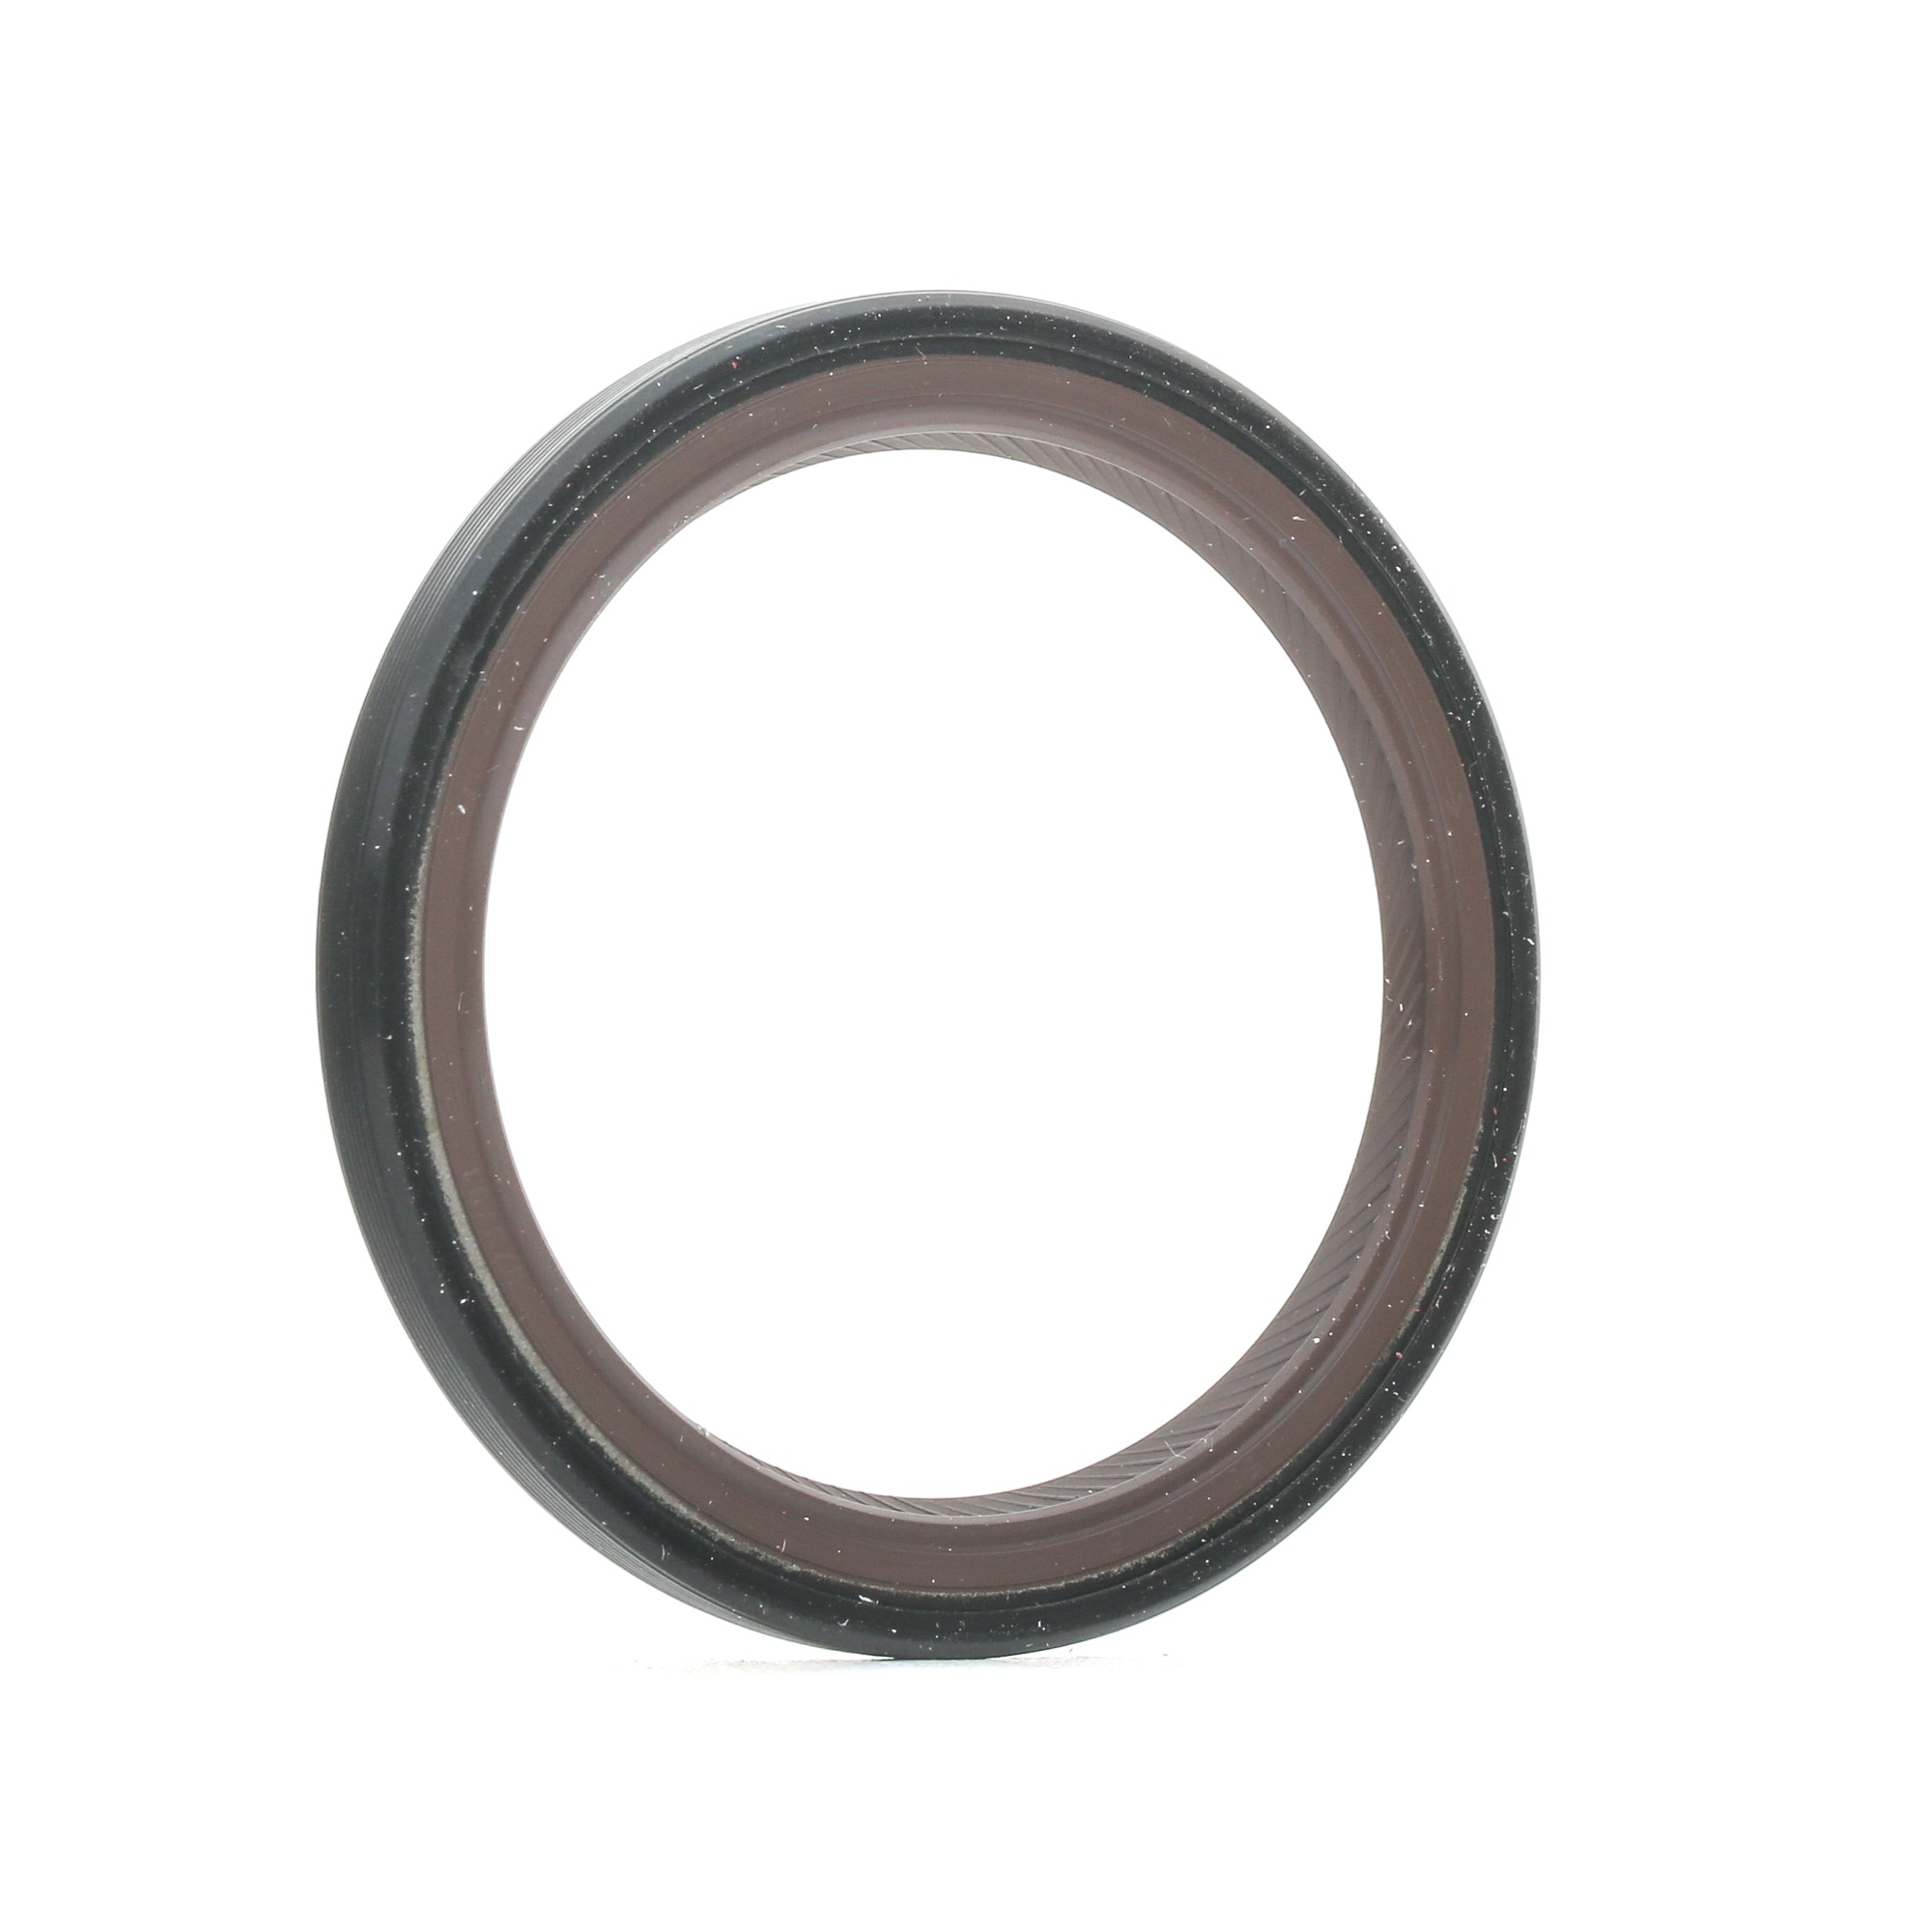 Original 394.110 ELRING Camshaft seal experience and price